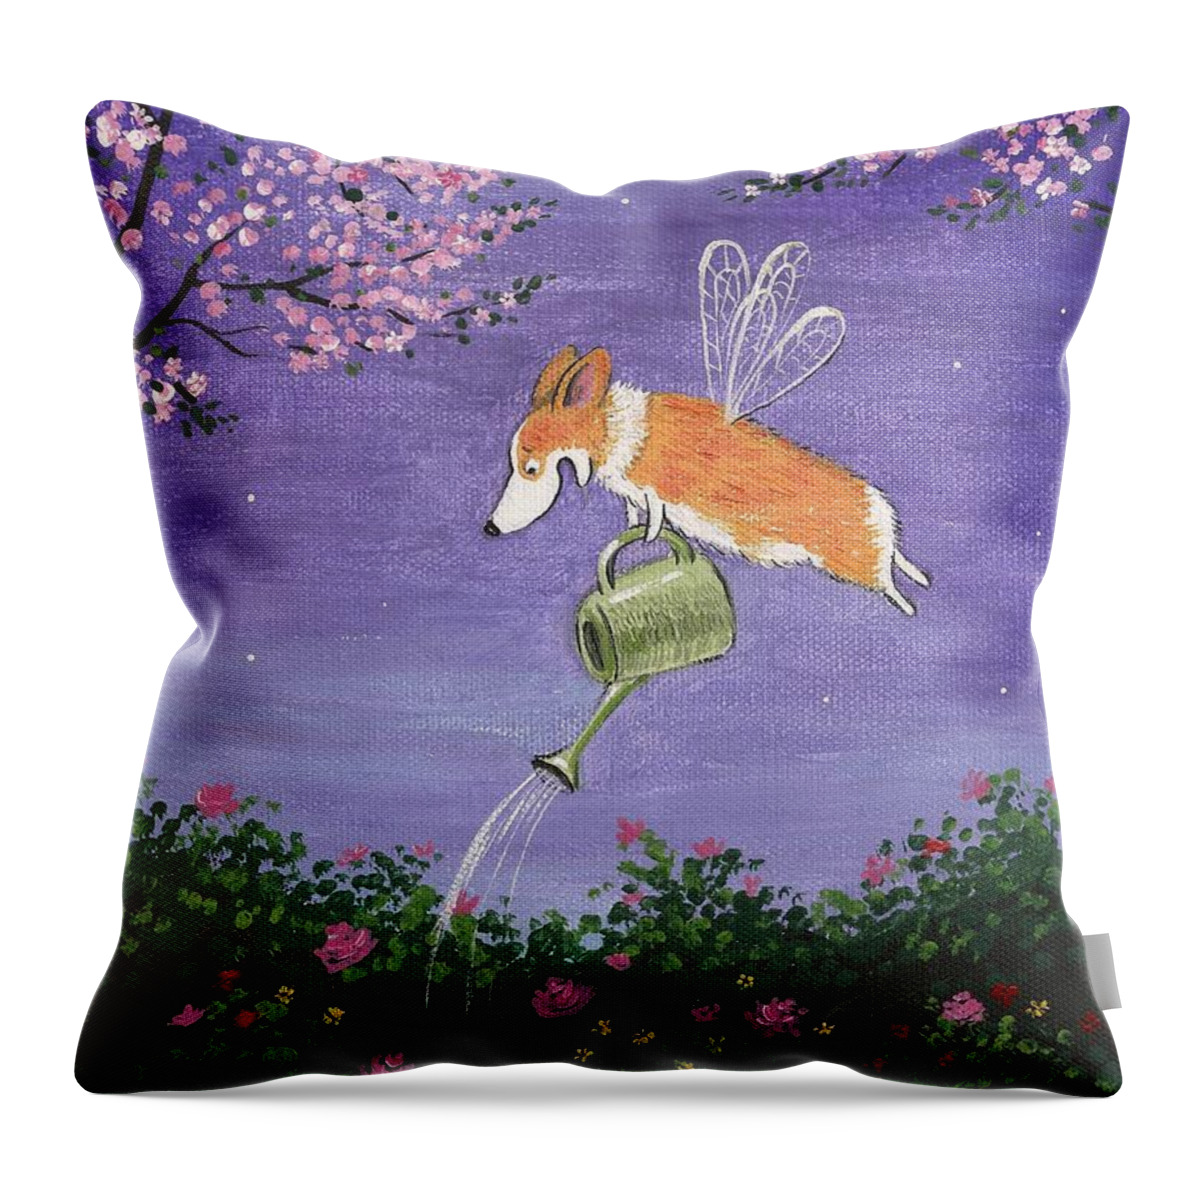 Print Throw Pillow featuring the painting Marking My Territory by Margaryta Yermolayeva